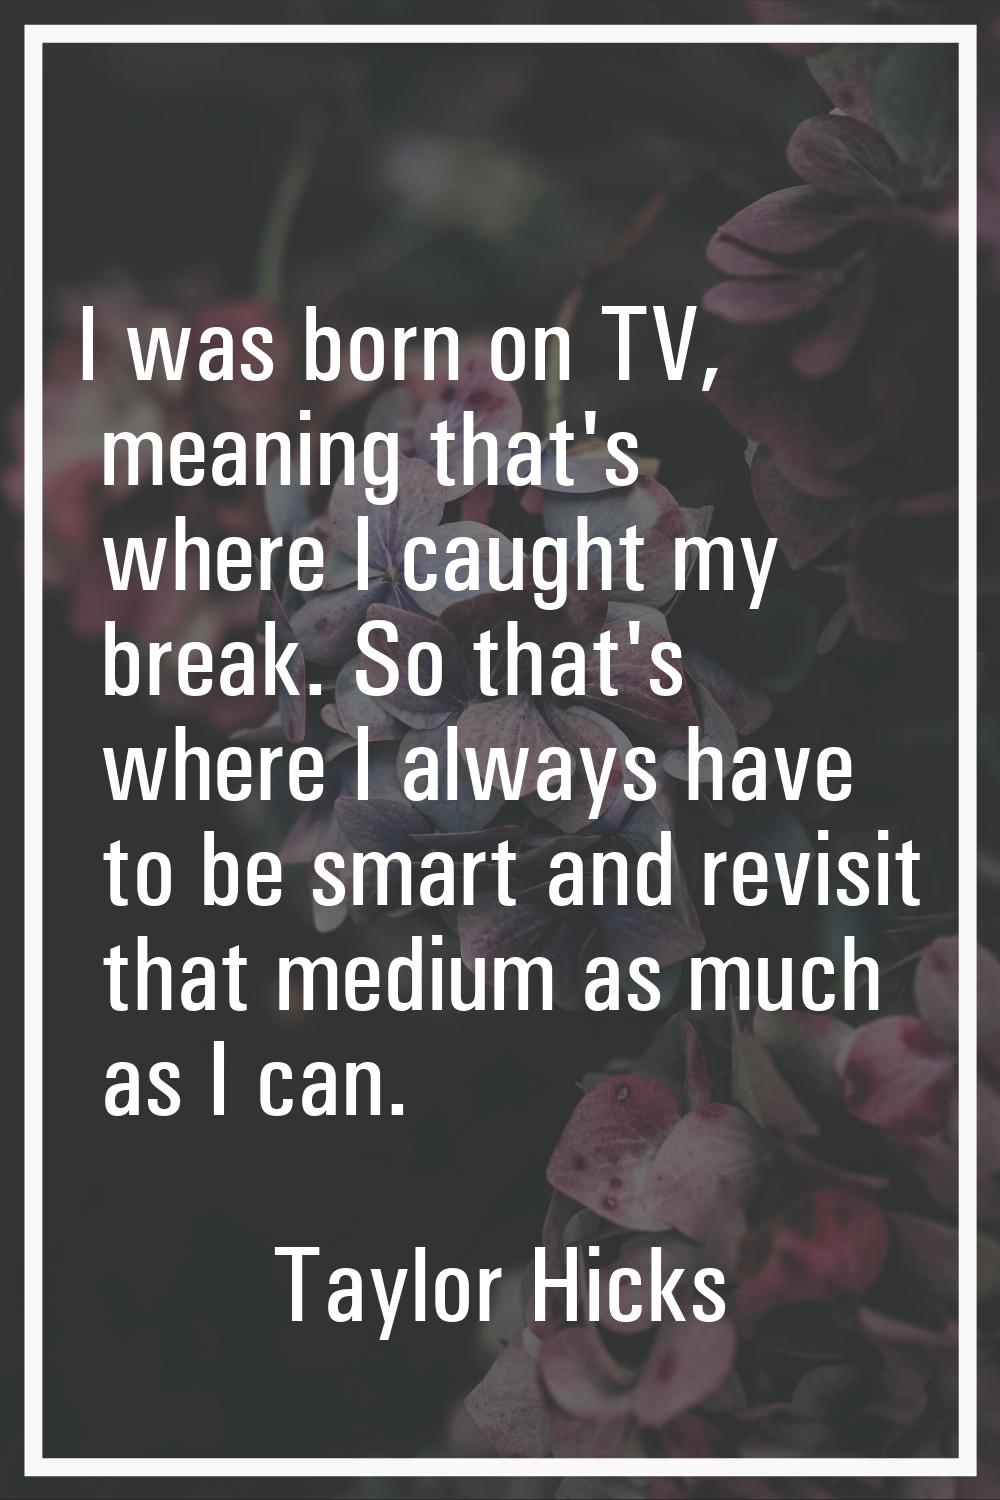 I was born on TV, meaning that's where I caught my break. So that's where I always have to be smart